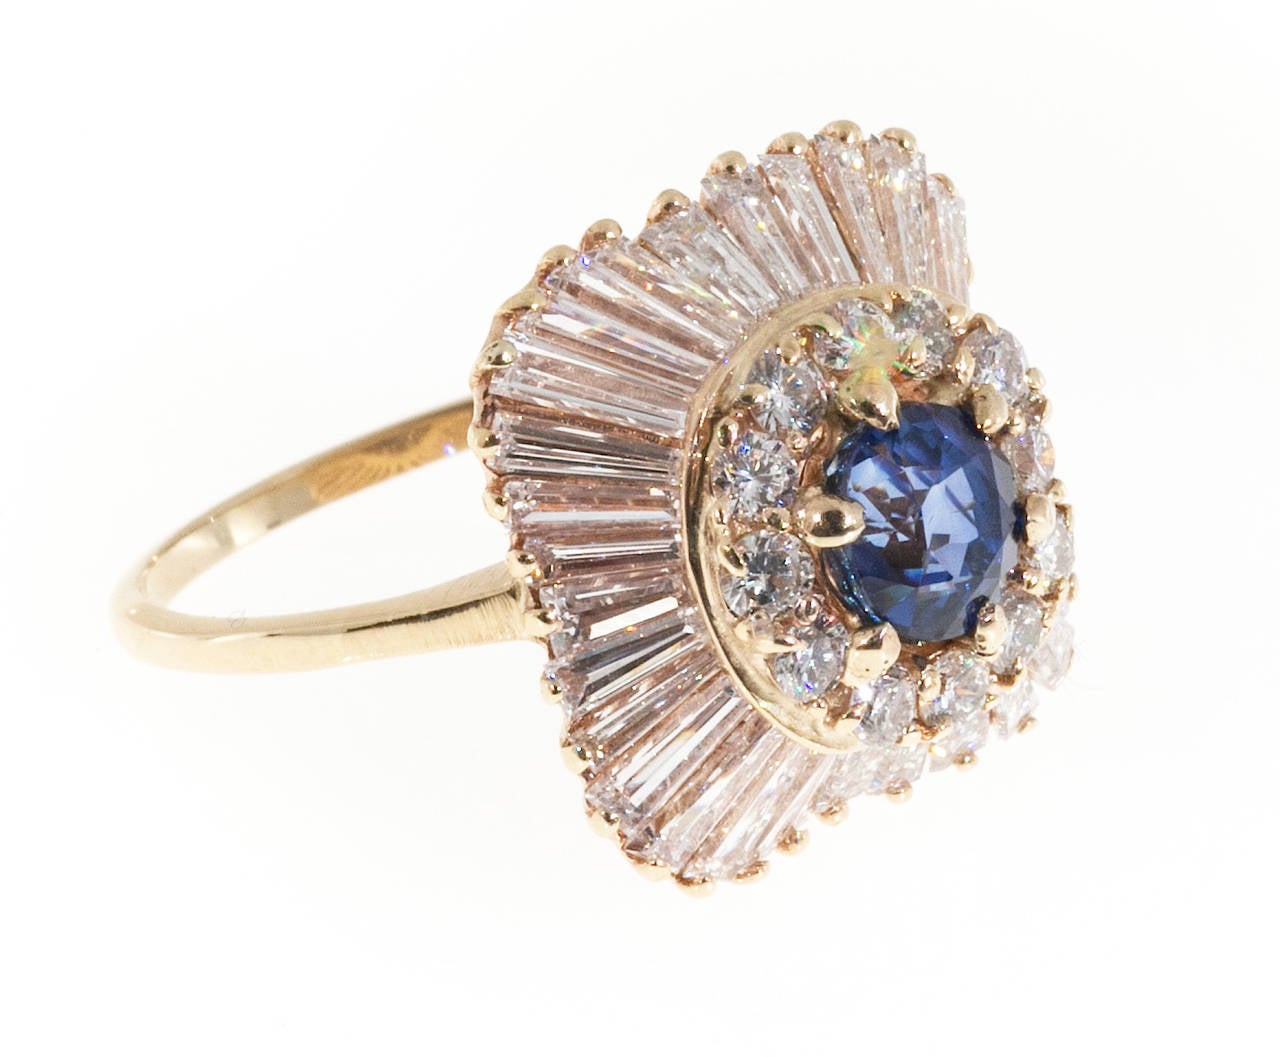 Ballerina style top quality  ring with custom unusually bright and vibrant baguette cut diamonds around the outside. The center has equally good round diamonds surrounding one of the finest sapphires that we have ever seen in years. The sapphire is